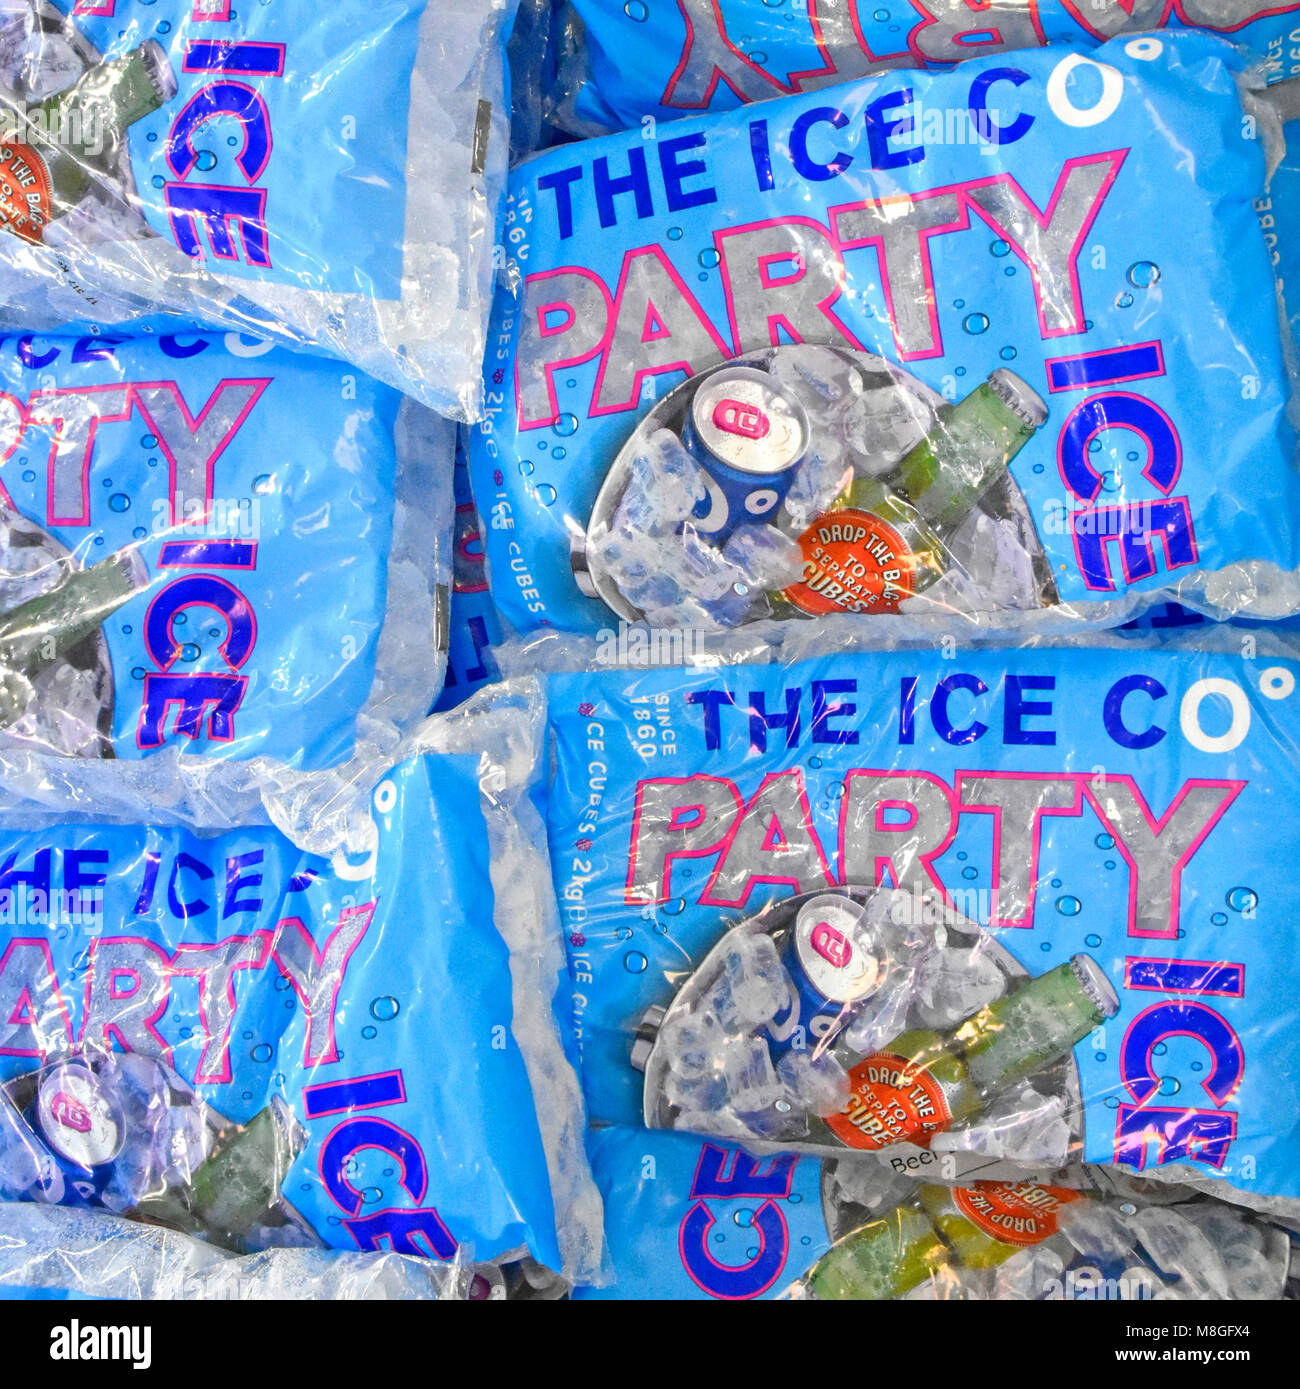 https://c8.alamy.com/comp/M8GFX4/packaging-for-ice-cube-for-cool-drinks-sold-in-plastic-bags-of-ice-M8GFX4.jpg